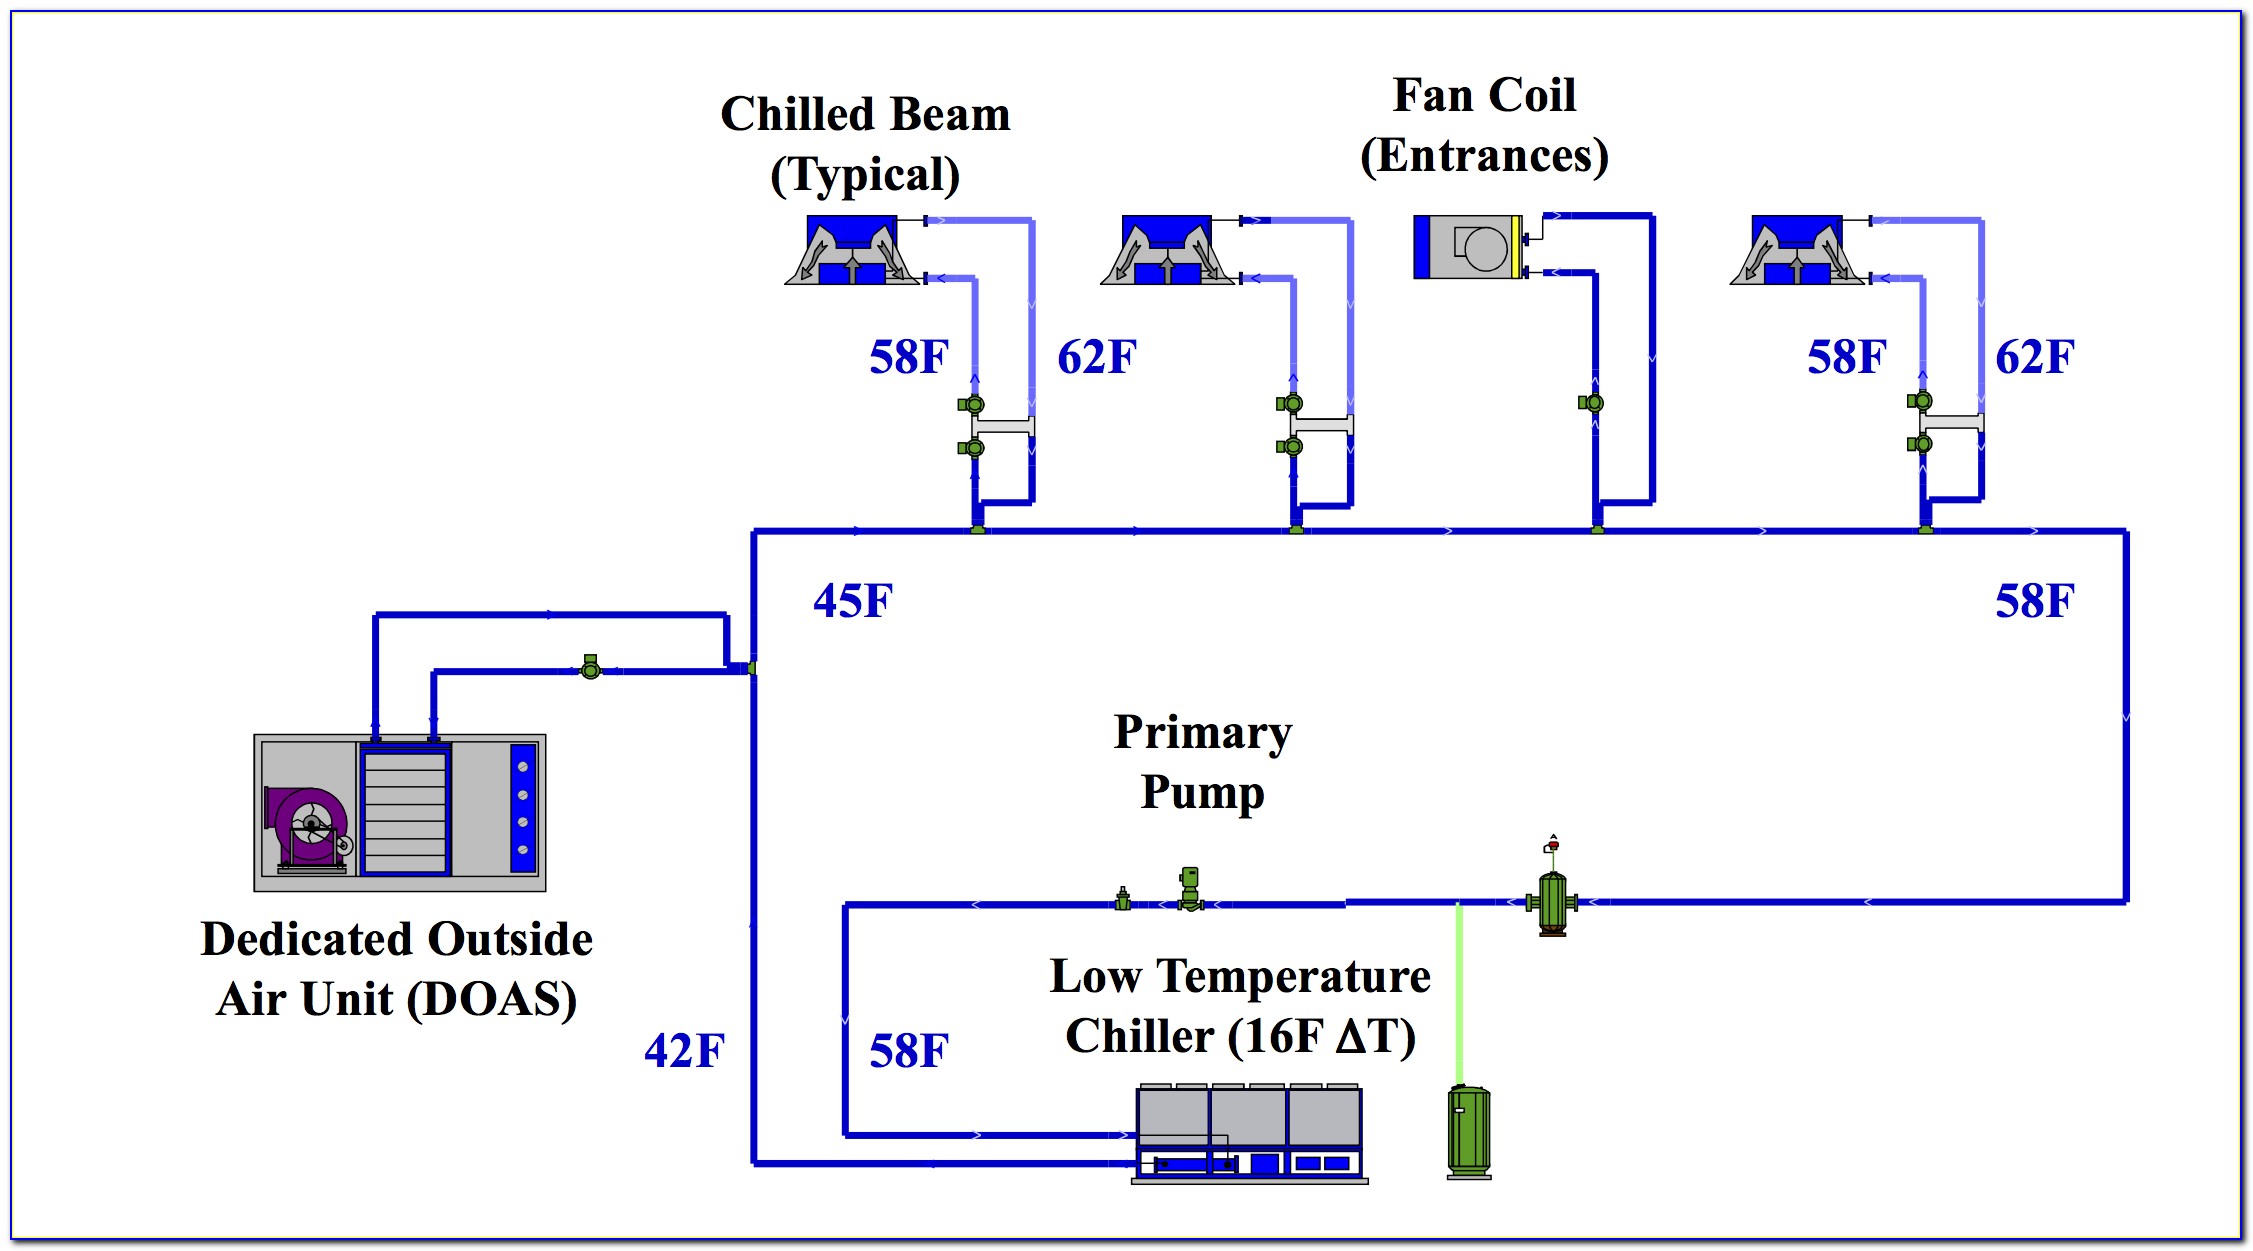 Chilled Beam Piping Schematic